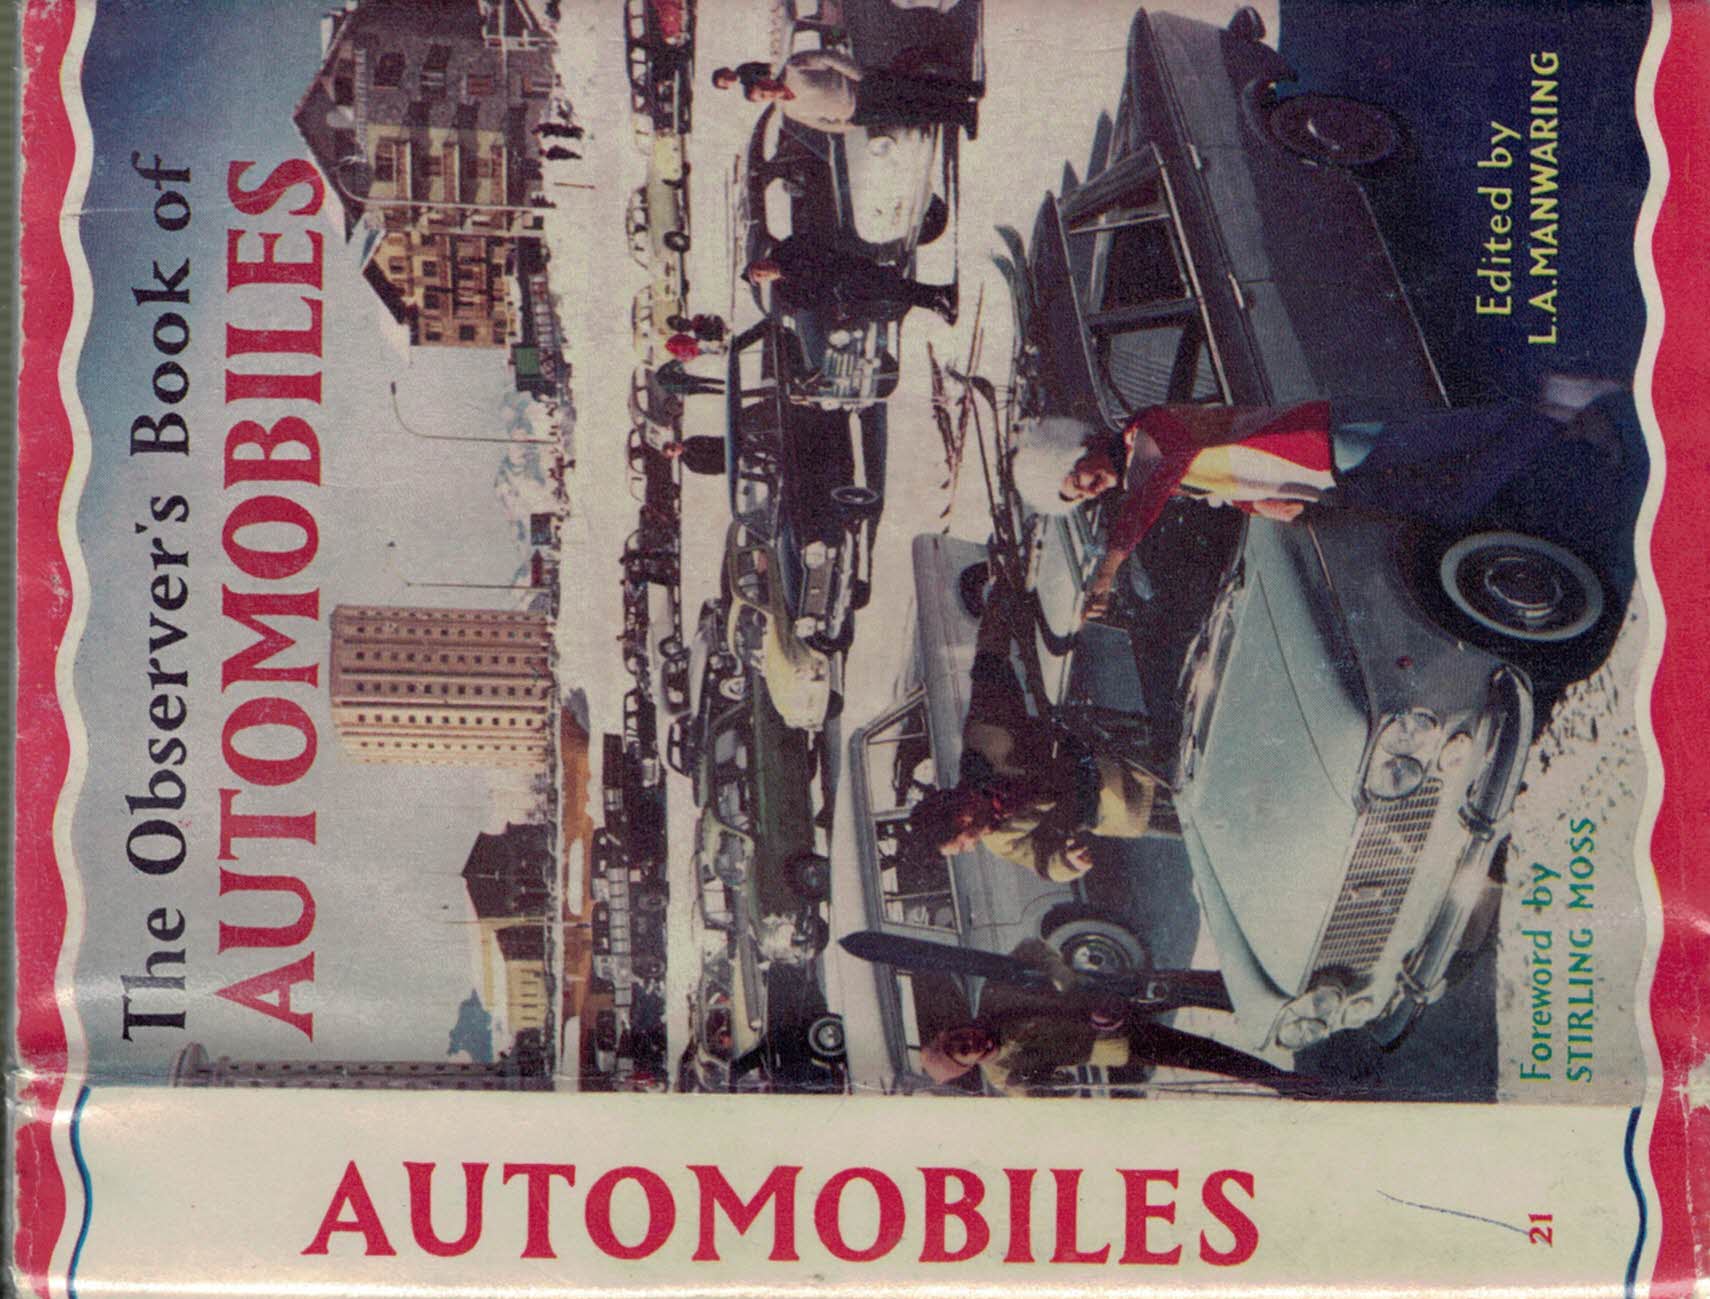 The Observer's Book of Automobiles. 1963.